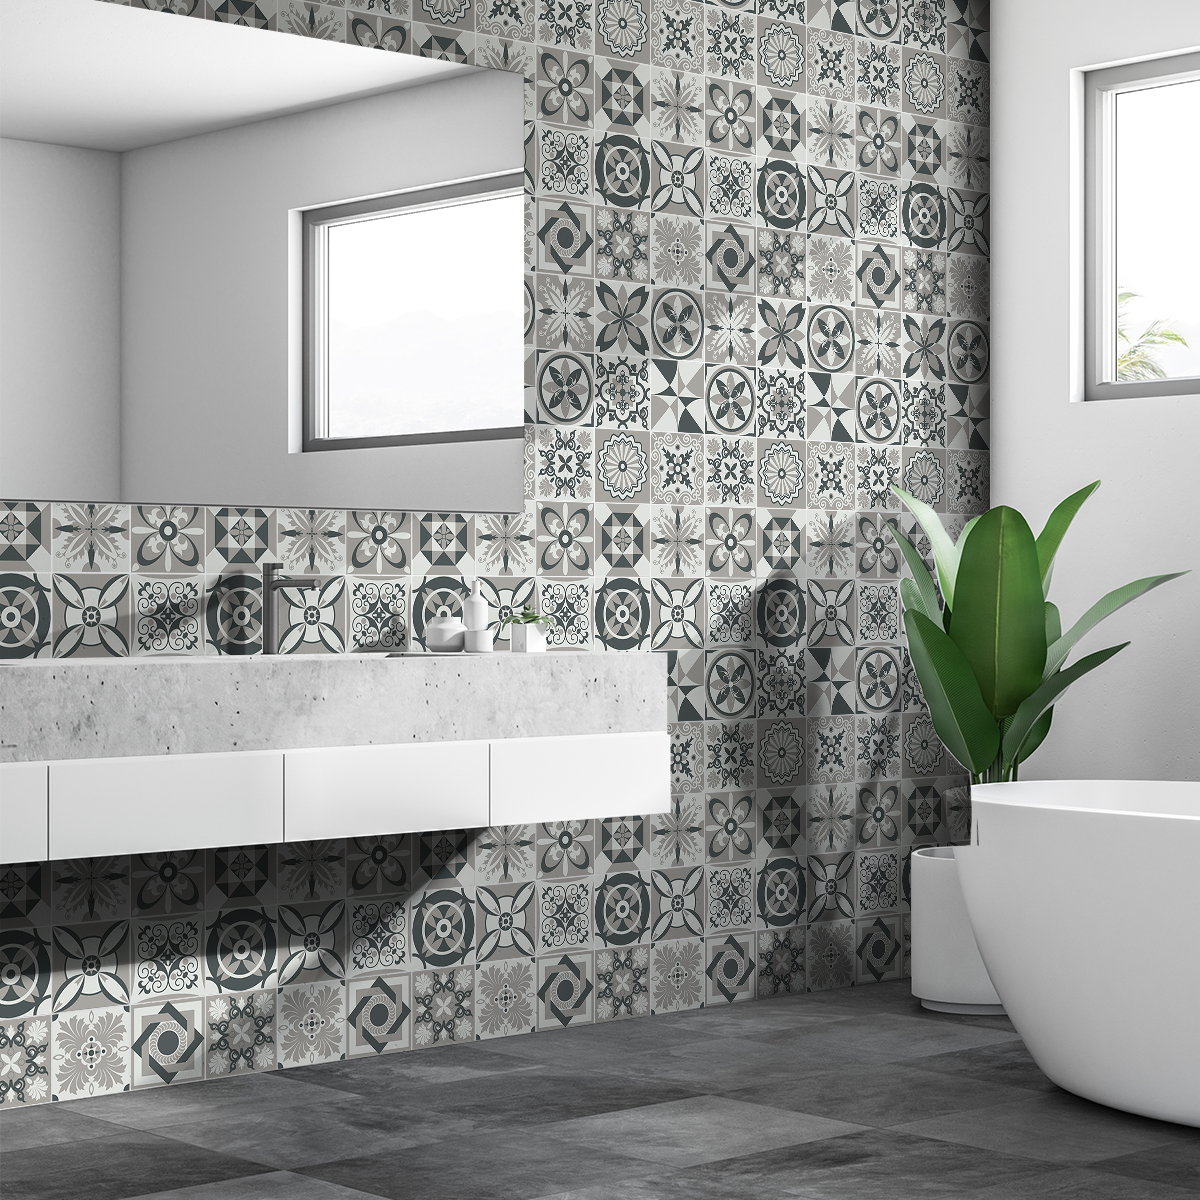 60 wall decal cement tiles azulejos rozia